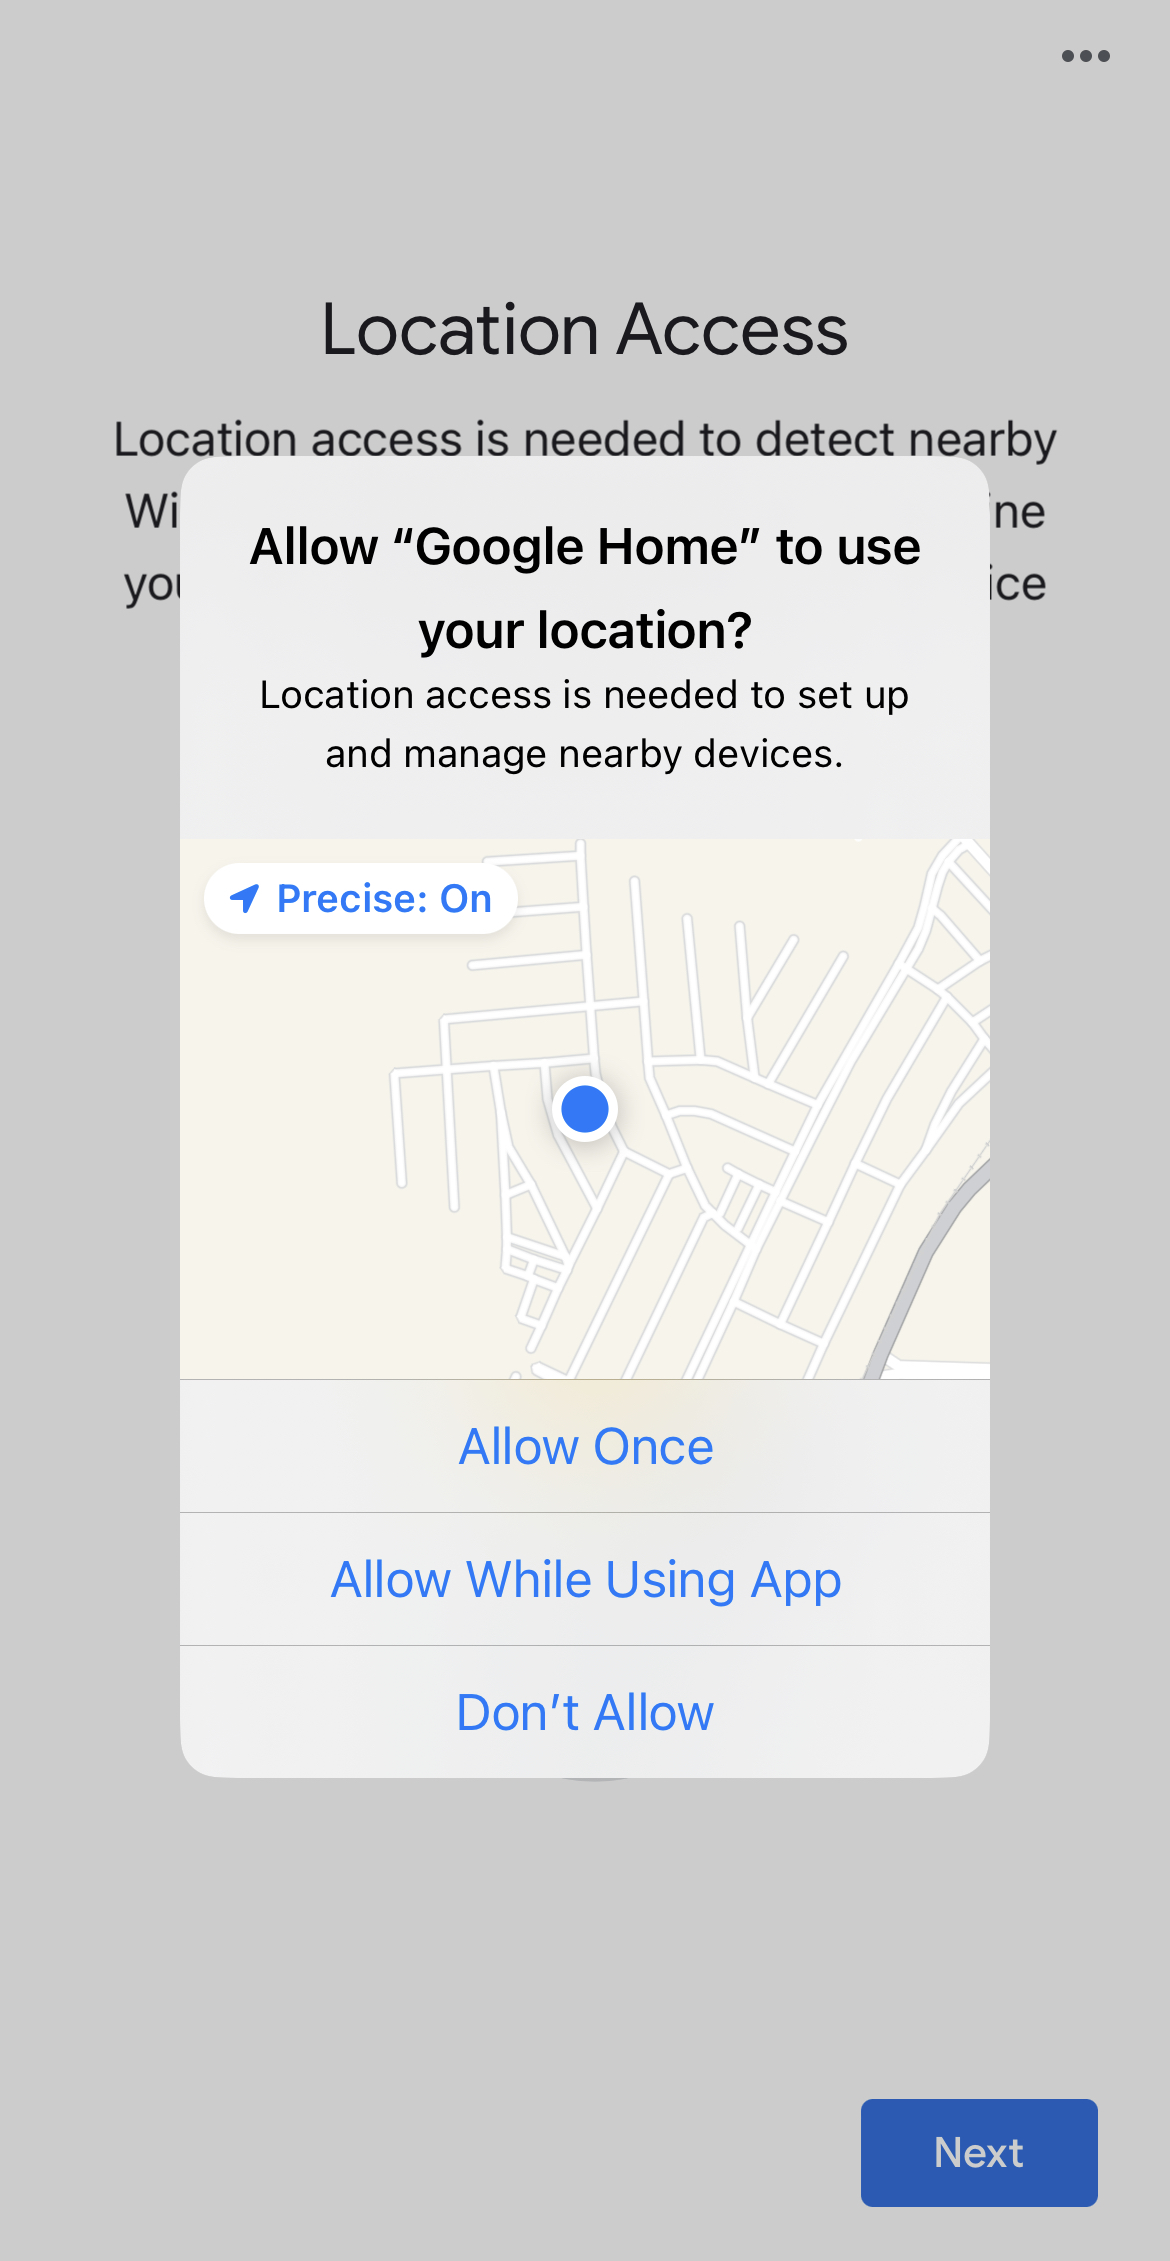 Letting Google Home access to your location